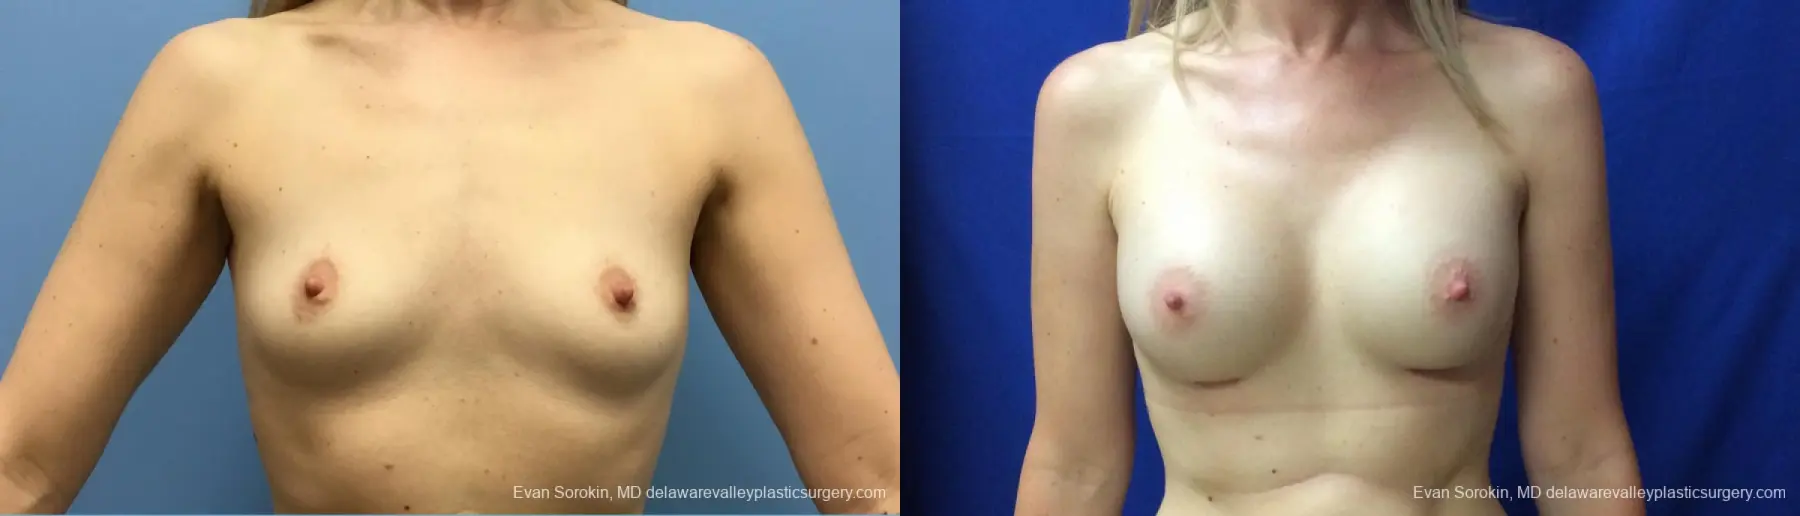 Philadelphia Breast Augmentation 12520 - Before and After 1